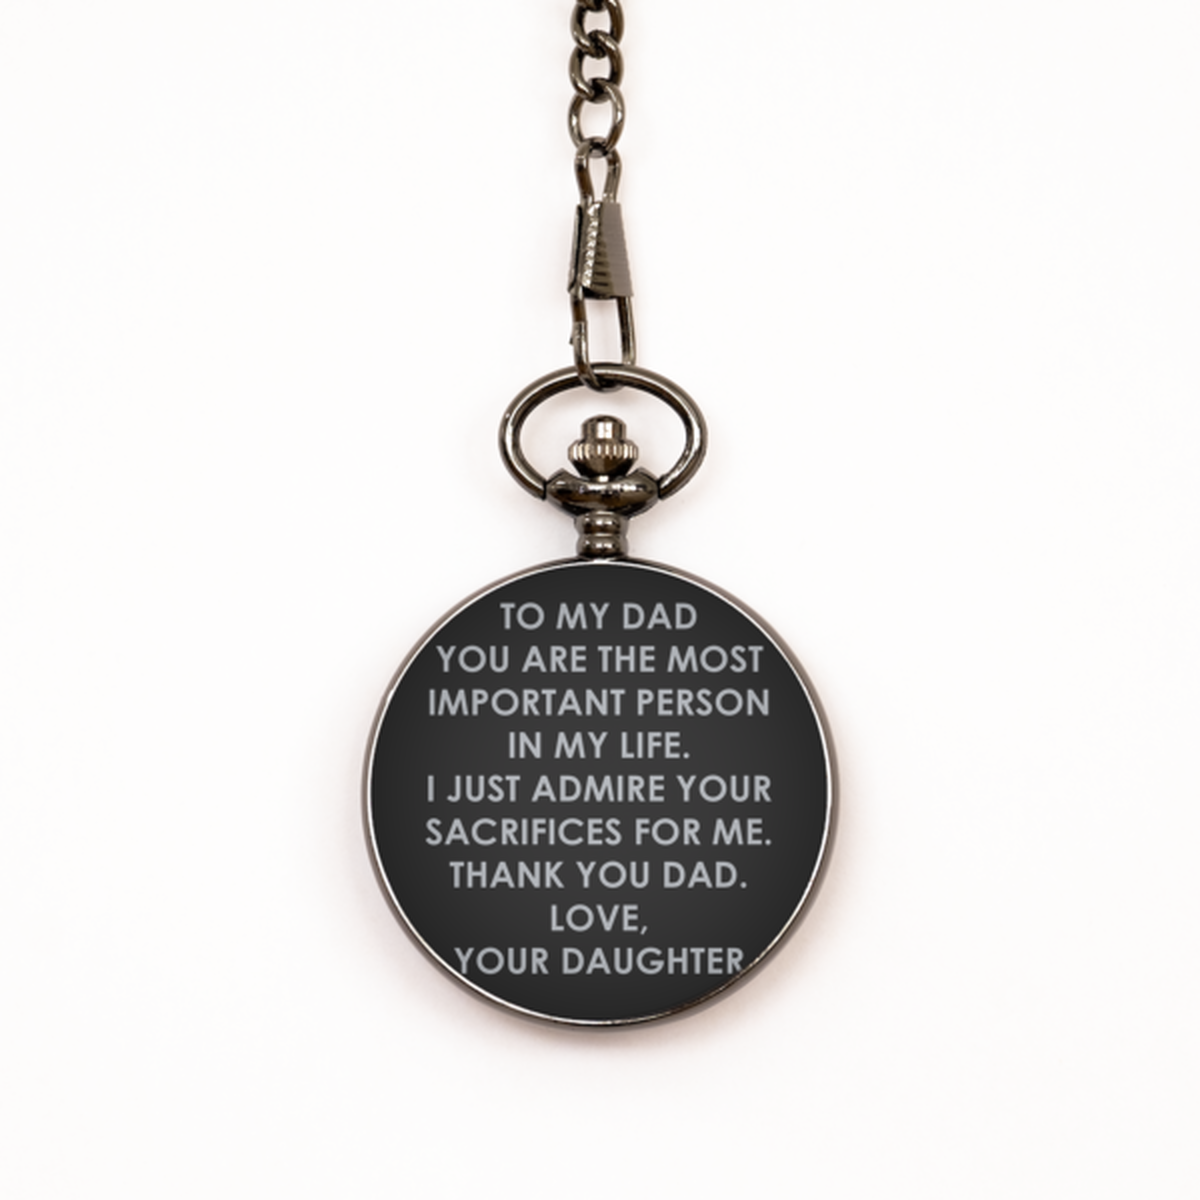 To My Dad Black Pocket Watch, You Are The Most Important Person, Fathers Day Gifts For Dad From Daughter, Birthday Gifts For Men